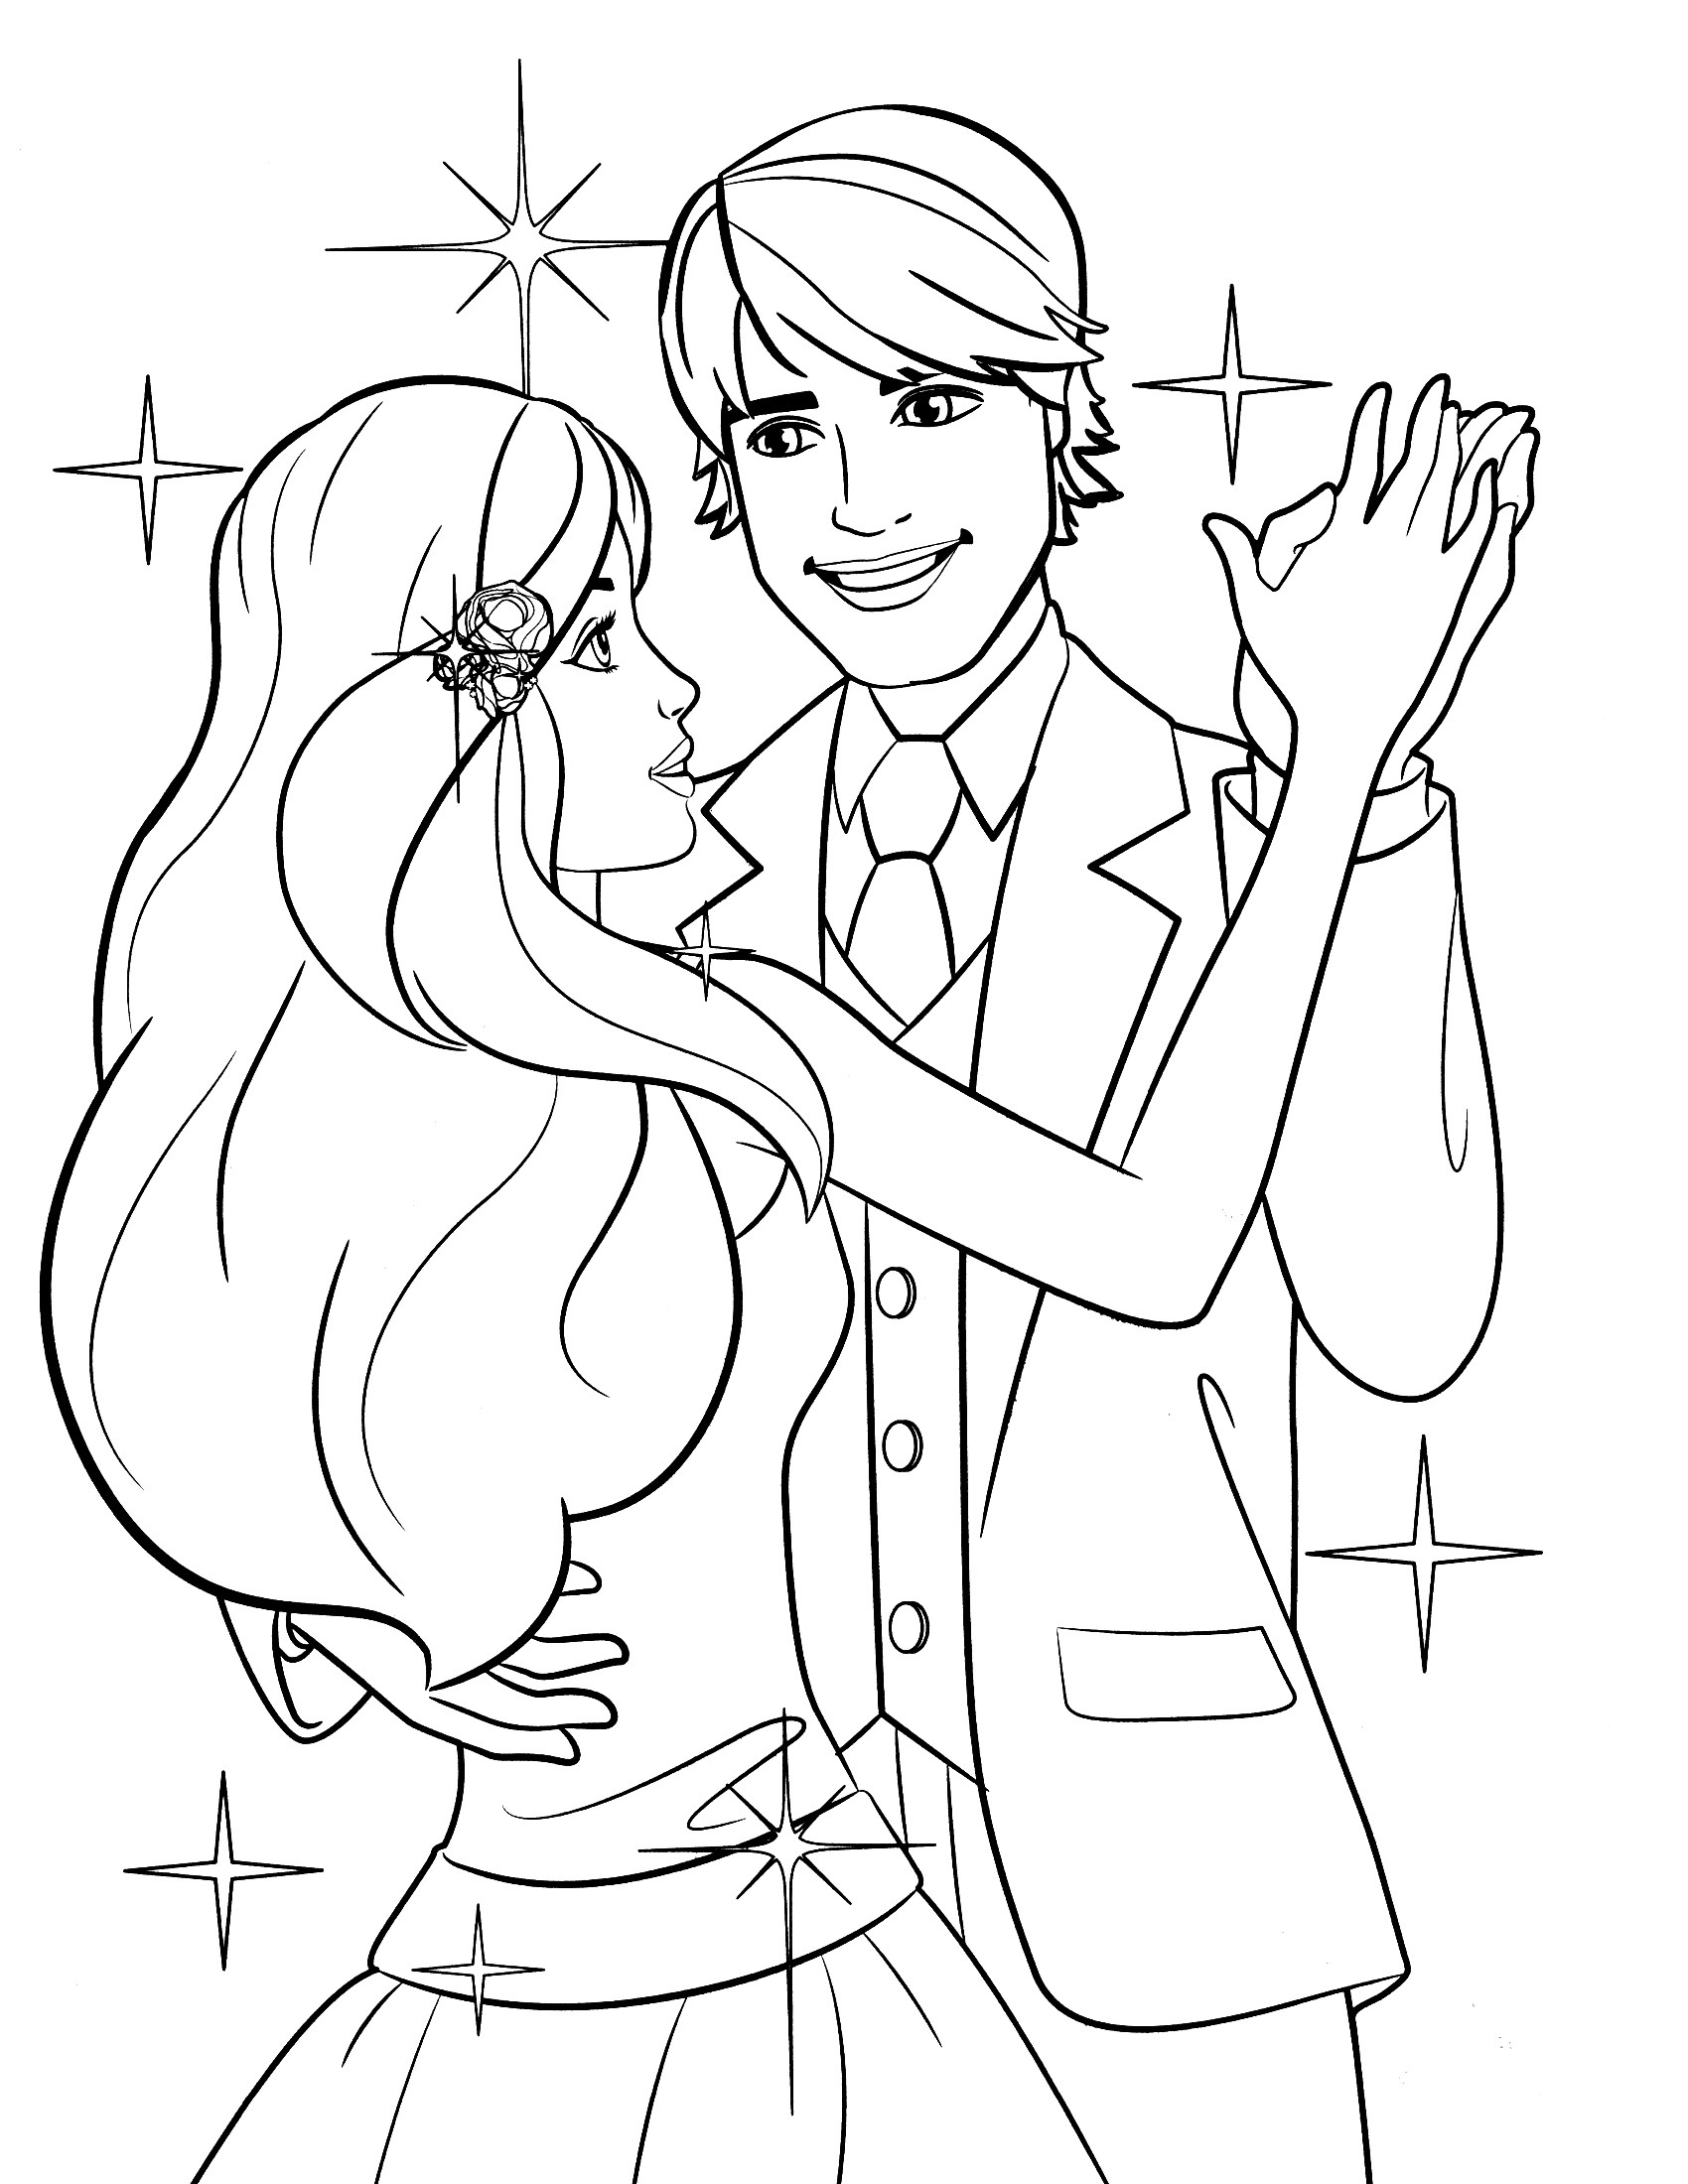 Wedding Coloring Book Pages
 Wedding Coloring Pages Best Coloring Pages For Kids